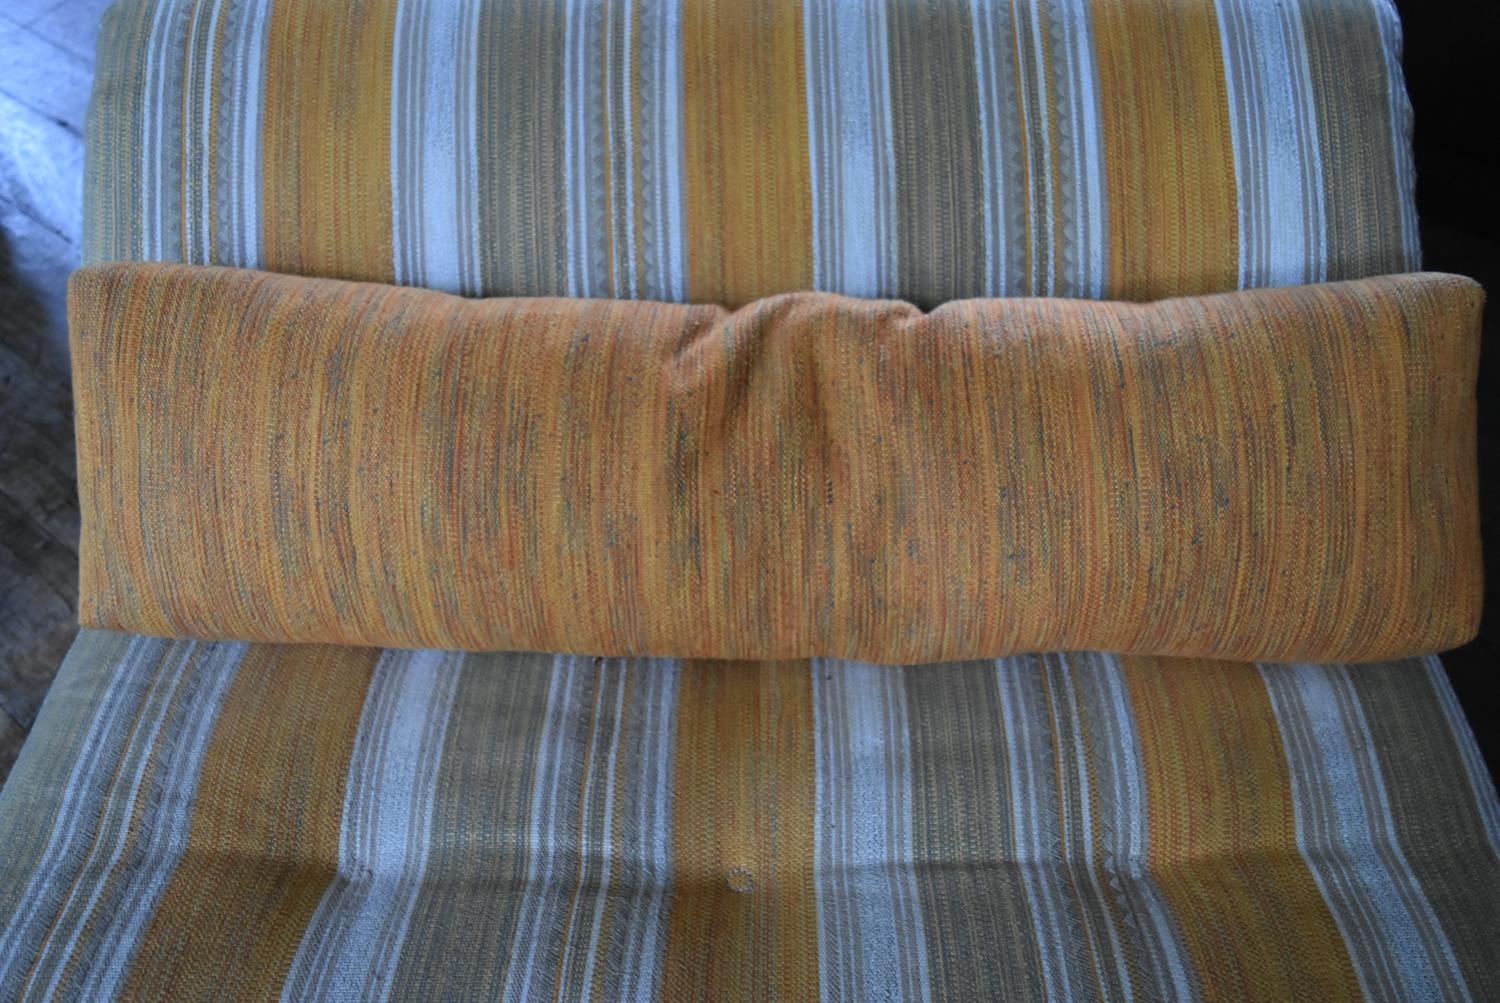 A Roche Bobois chaise in soft candy stripe buttoned upholstery with bolster cushion. H.60 L.140 W. - Image 5 of 5